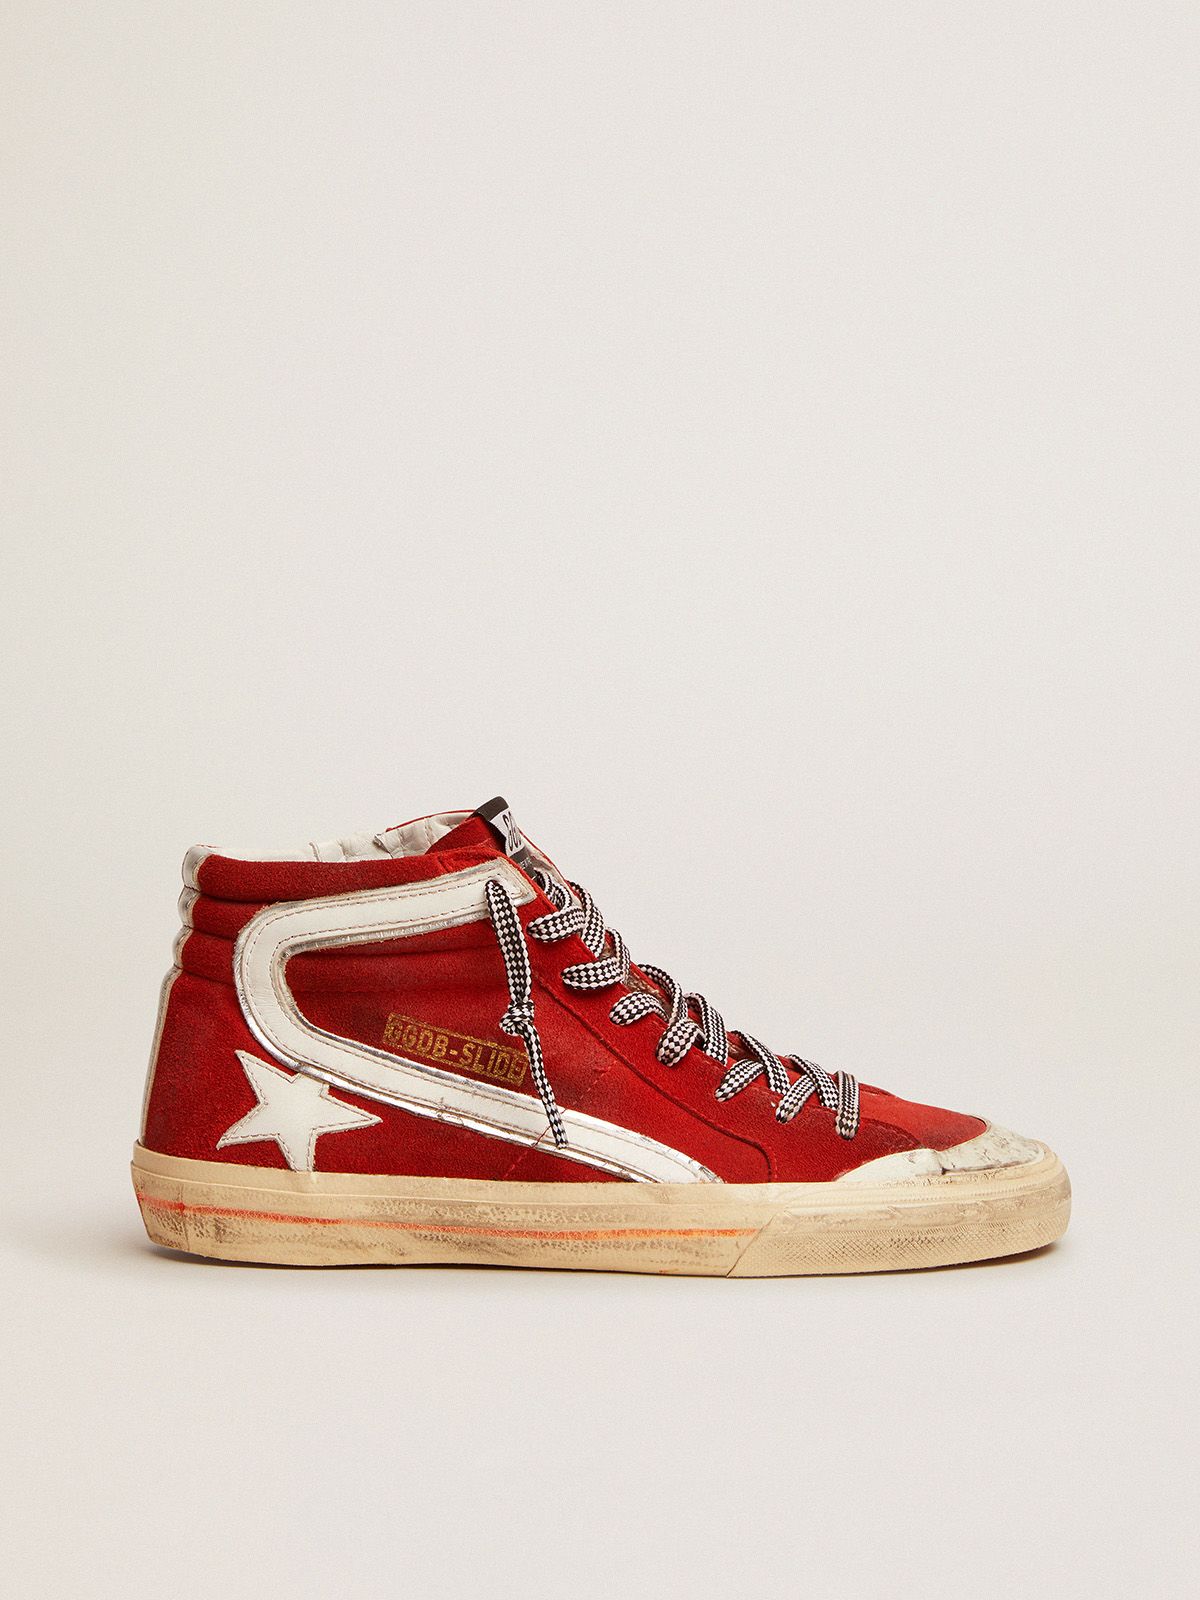 Golden Goose Donna Sneakers Penstar Slide sneakers in red suede with white details